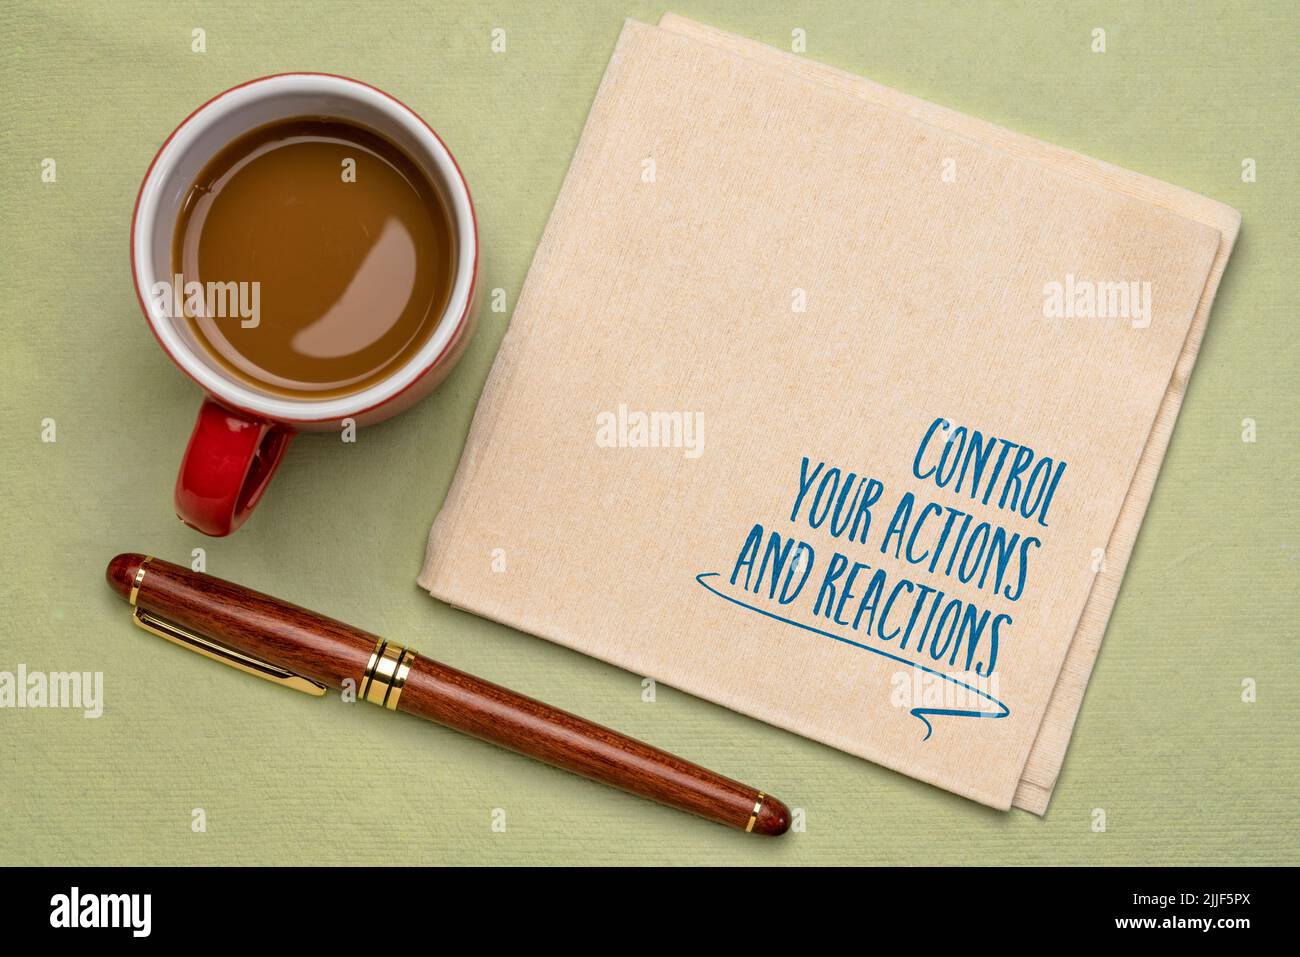 control your actions and reactions inspirational advice, handwriting on a napkin with coffee, personal development and self improvement concept Stock Photo